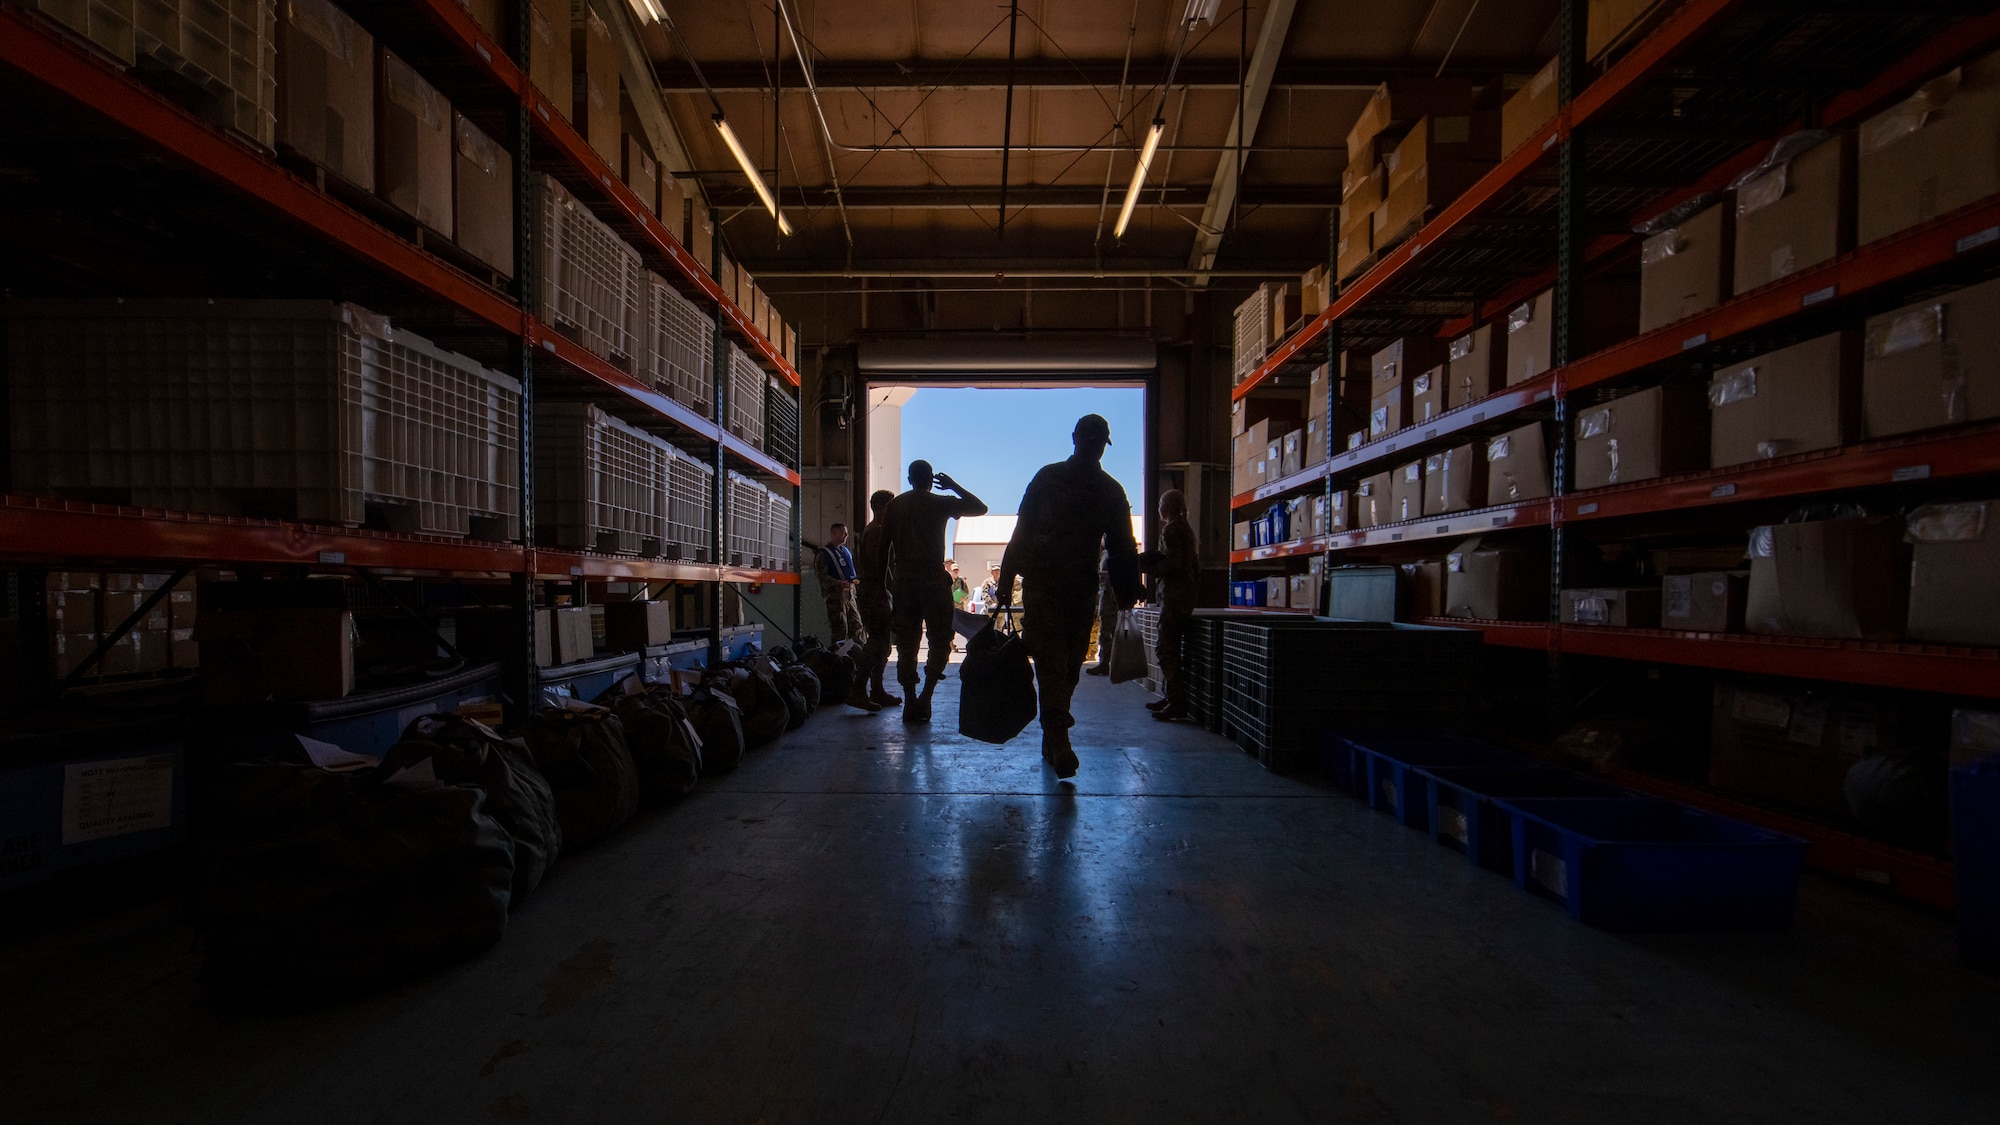 U.S. Air Force Airmen assigned to the 56th Fighter Wing picks up deployment mobility gear from the 56th Logistics Readiness Squadron during exercise Crown Talon, May 4, 2022, at Luke Air Force Base, Arizona.